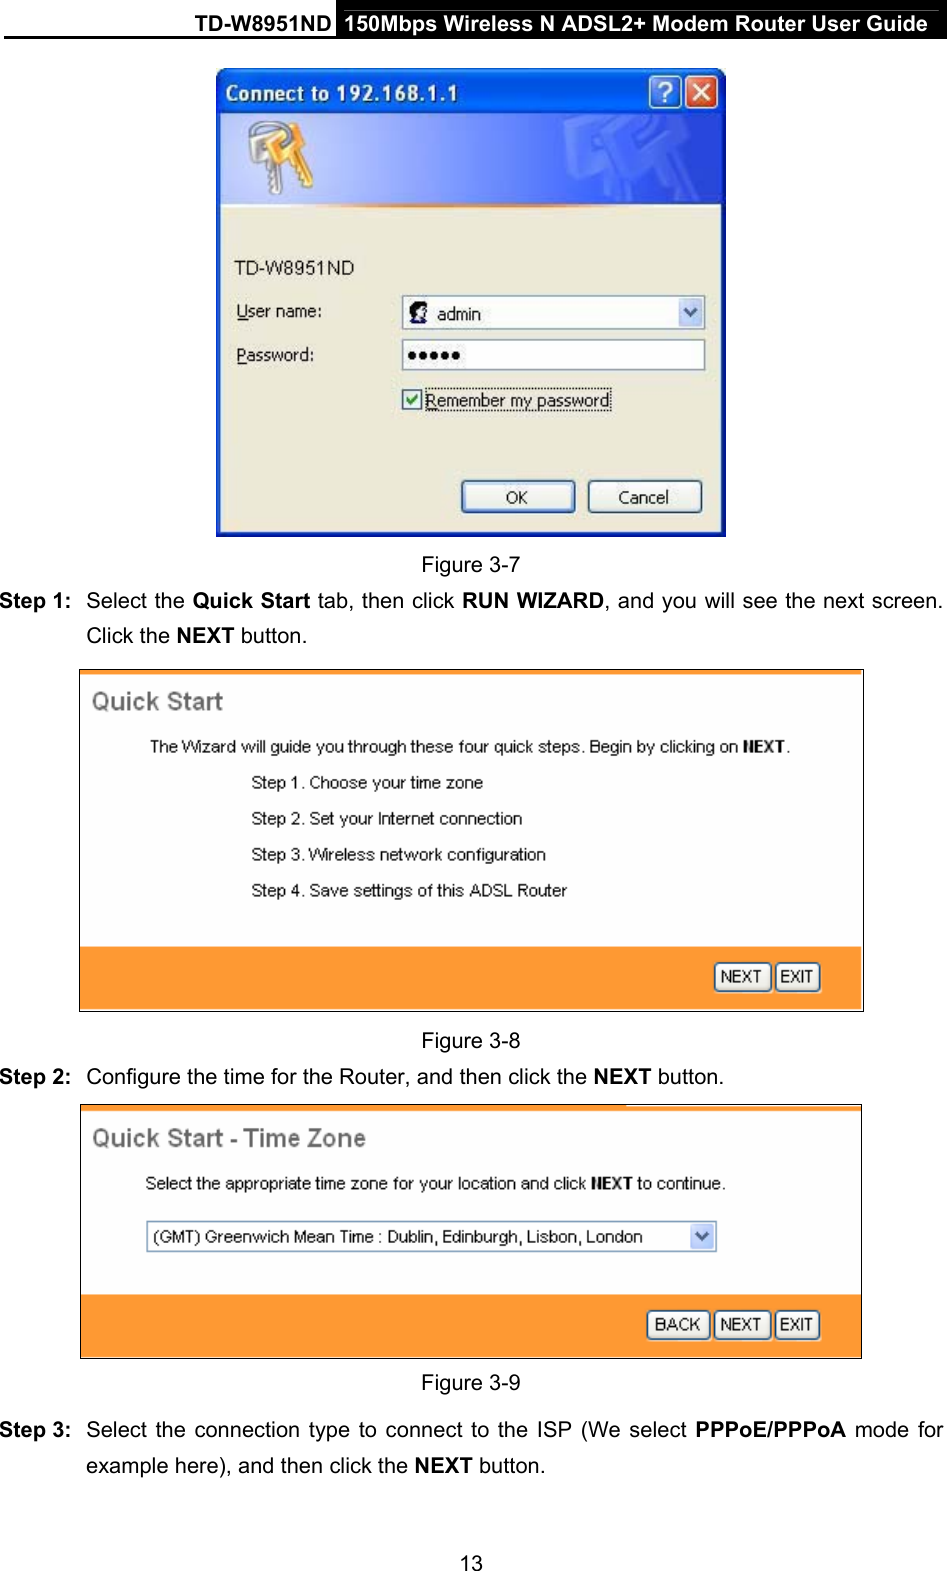 TD-W8951ND  150Mbps Wireless N ADSL2+ Modem Router User Guide  Figure 3-7 Step 1:  Select the Quick Start tab, then click RUN WIZARD, and you will see the next screen. Click the NEXT button.  Figure 3-8 Step 2:  Configure the time for the Router, and then click the NEXT button.  Figure 3-9 Step 3:  Select the connection type to connect to the ISP (We select PPPoE/PPPoA mode for example here), and then click the NEXT button. 13 